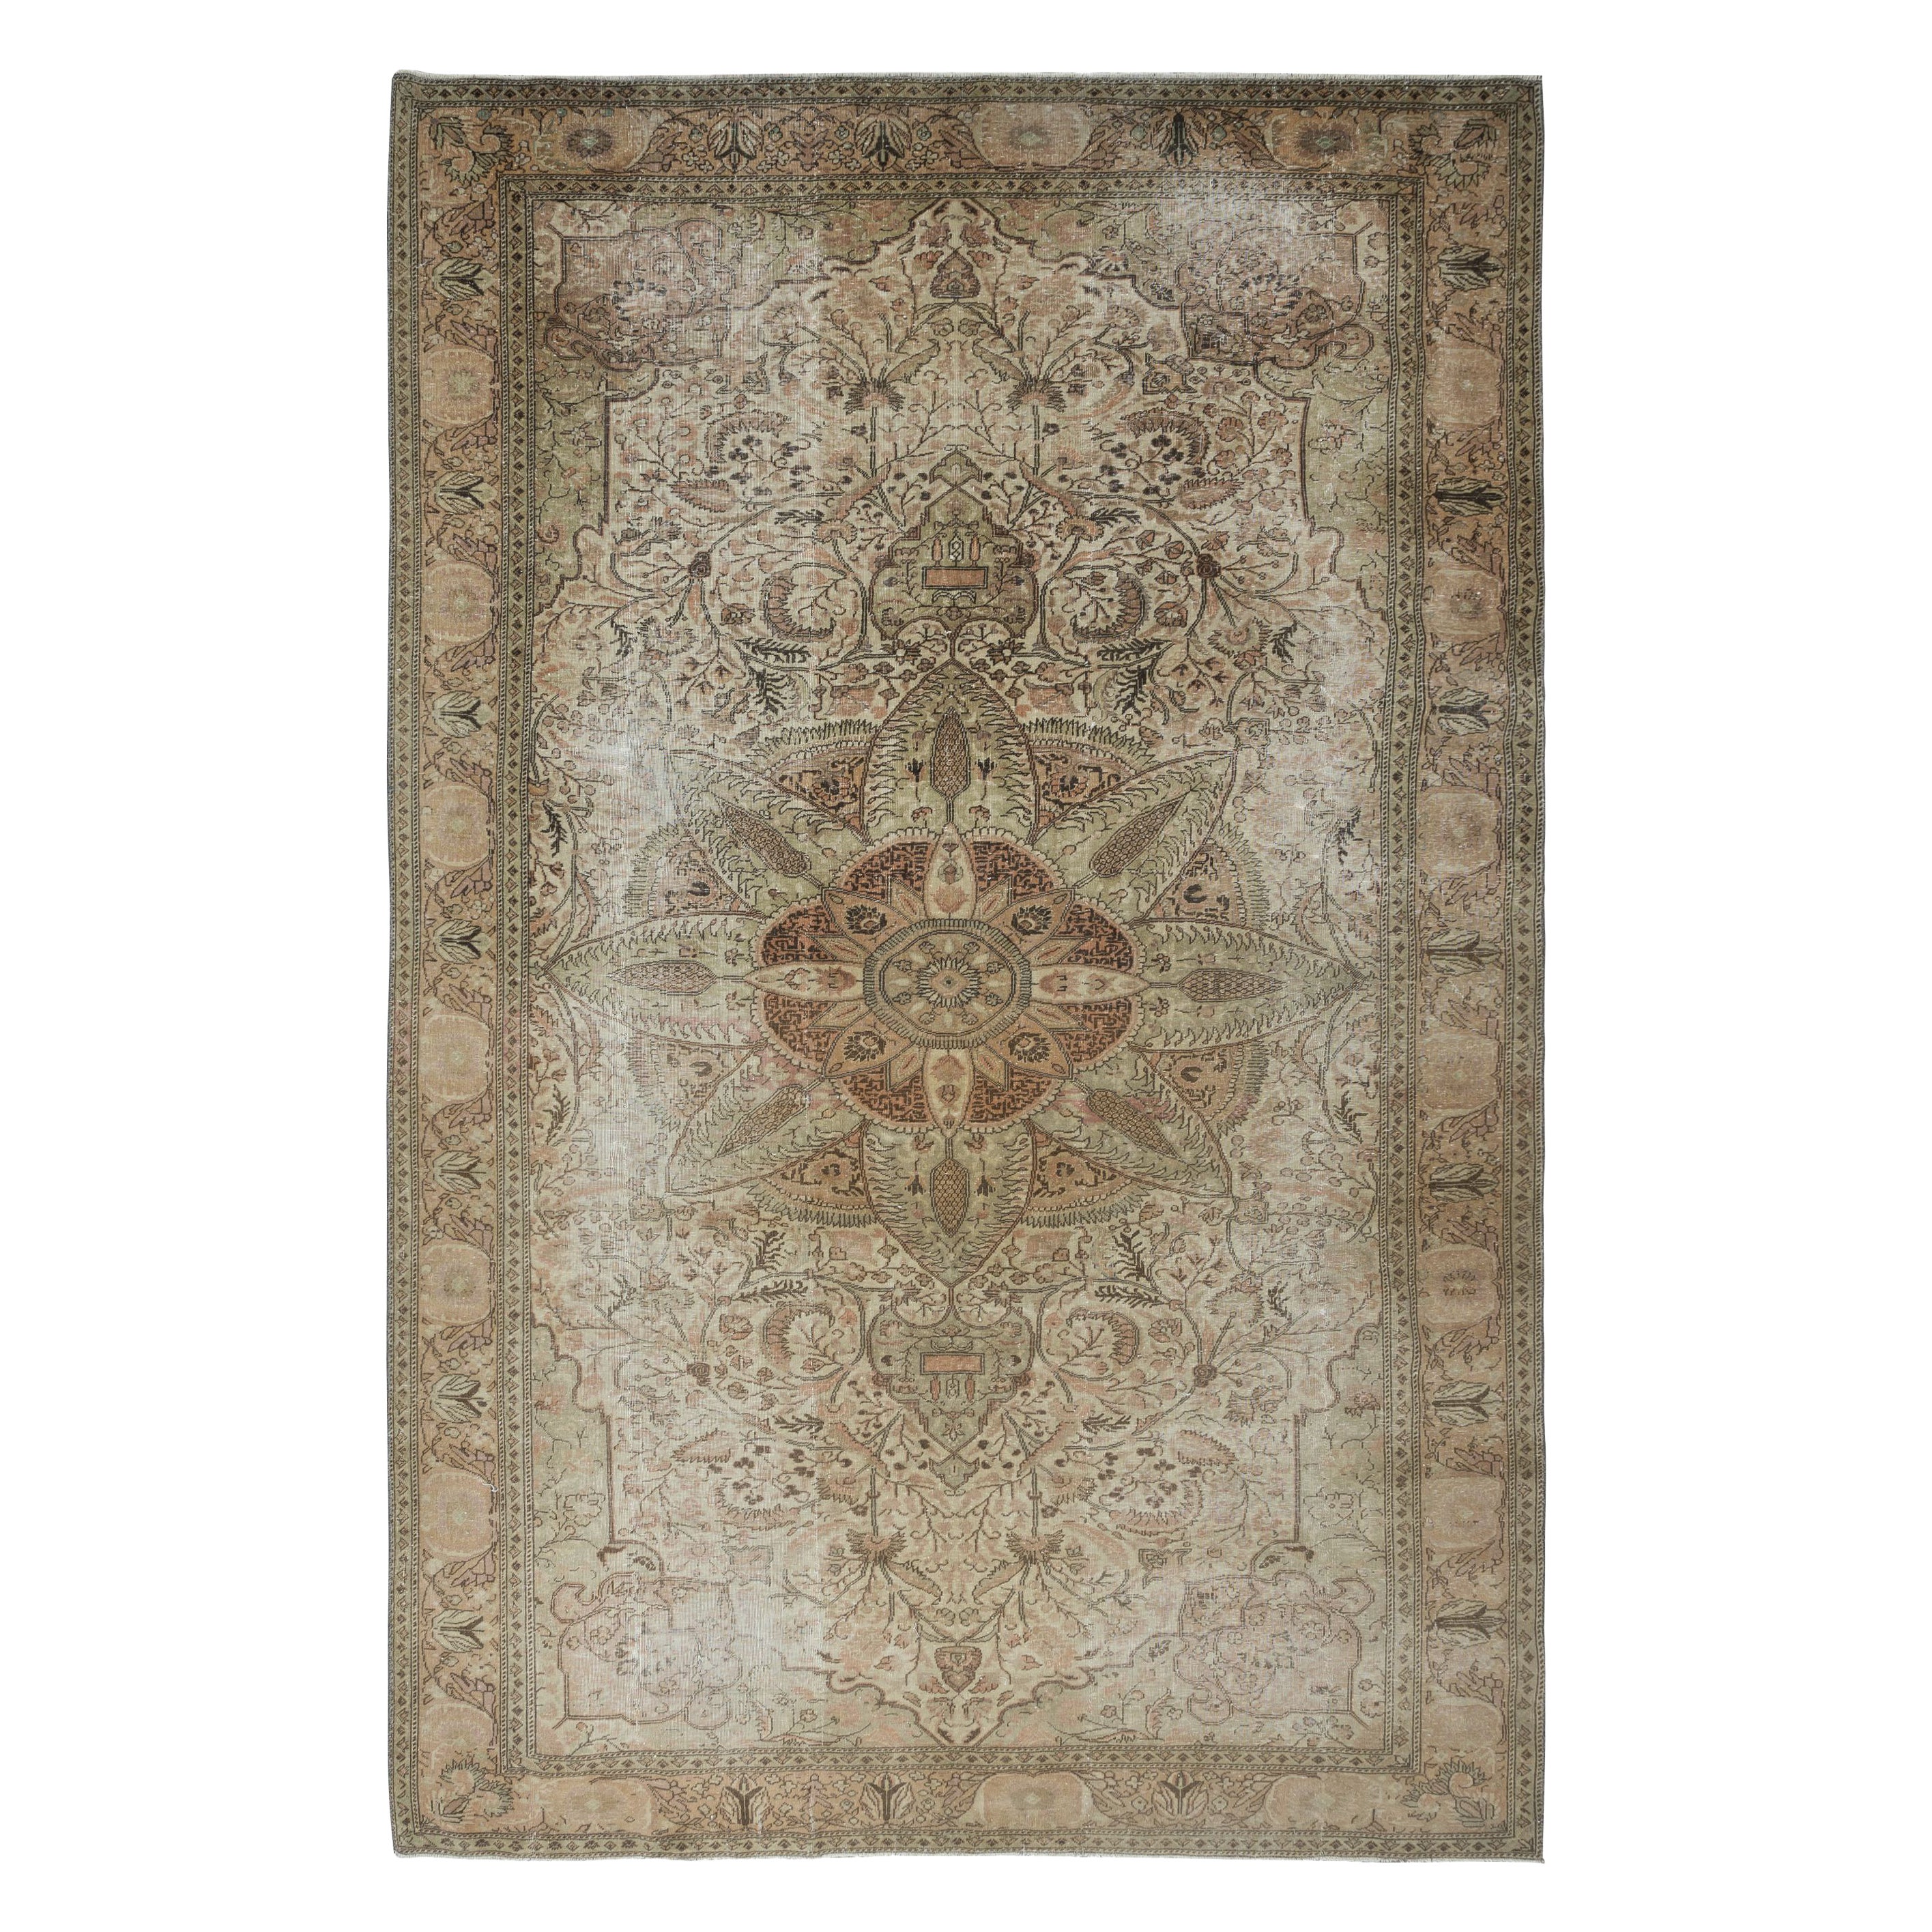 7.5x11.6 Ft One of a Kind Vintage Wool Area Rug, Hand Knotted Anatolian Carpet